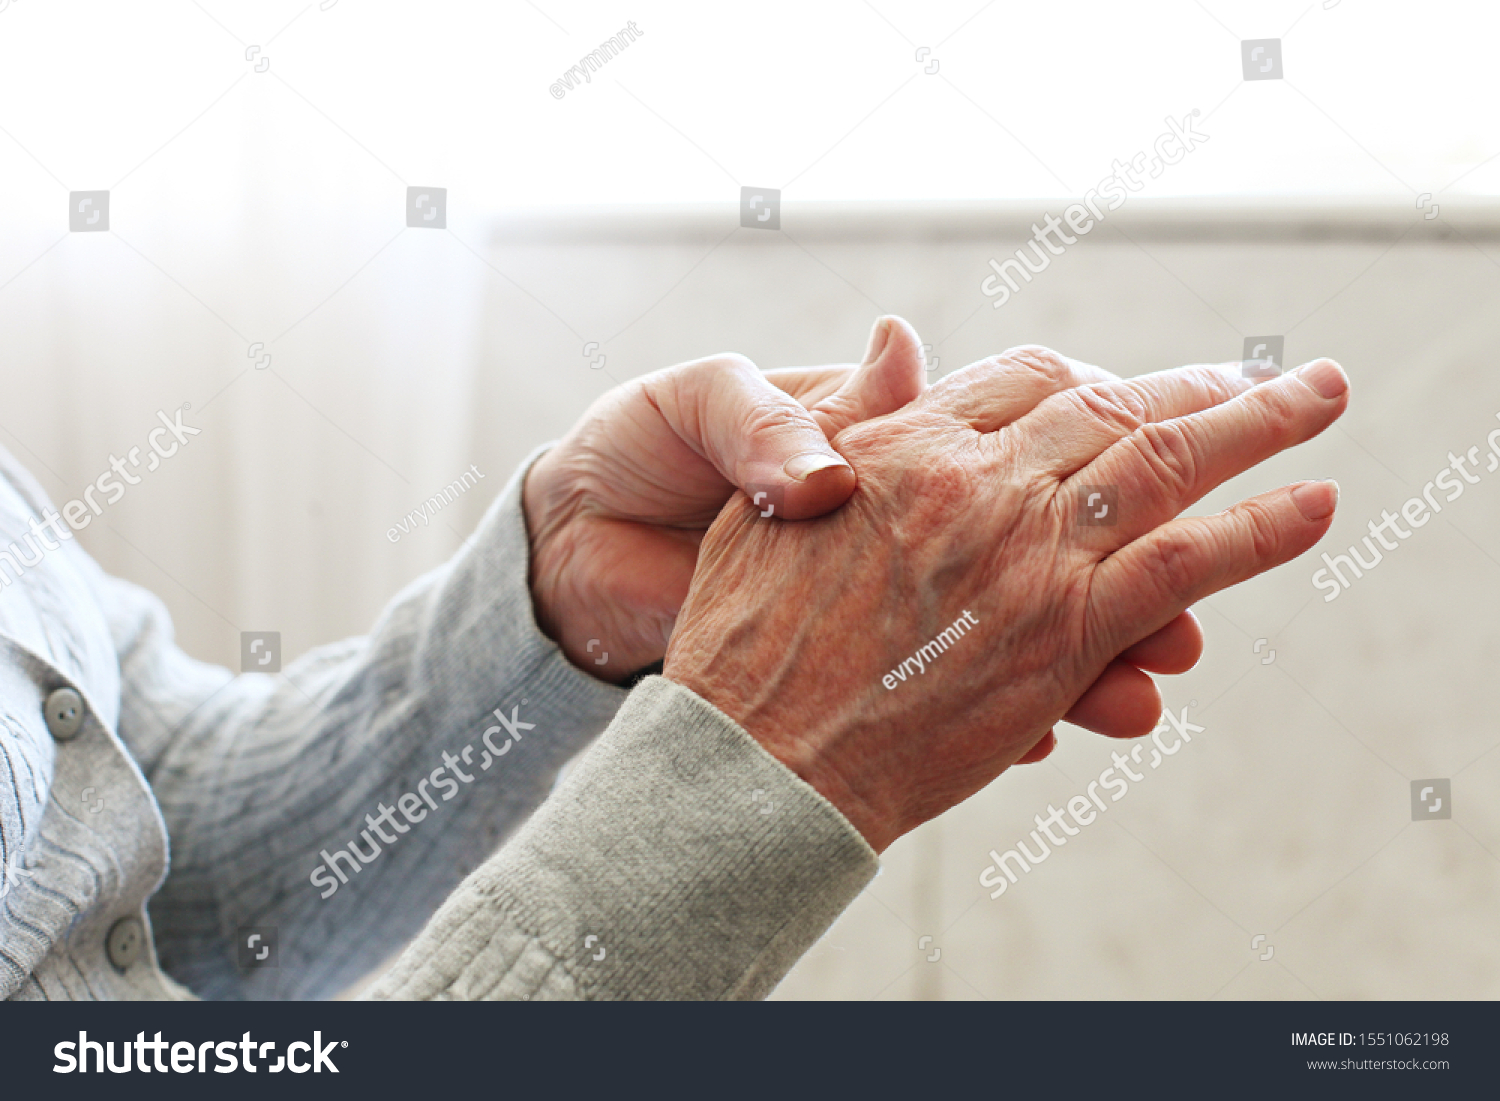 Elderly woman applying moisturizing lotion cream on hand palm, easing aches. Senior old lady experiencing severe arthritis rheumatics pains, massaging, warming up arm. Close up, copy space, background #1551062198